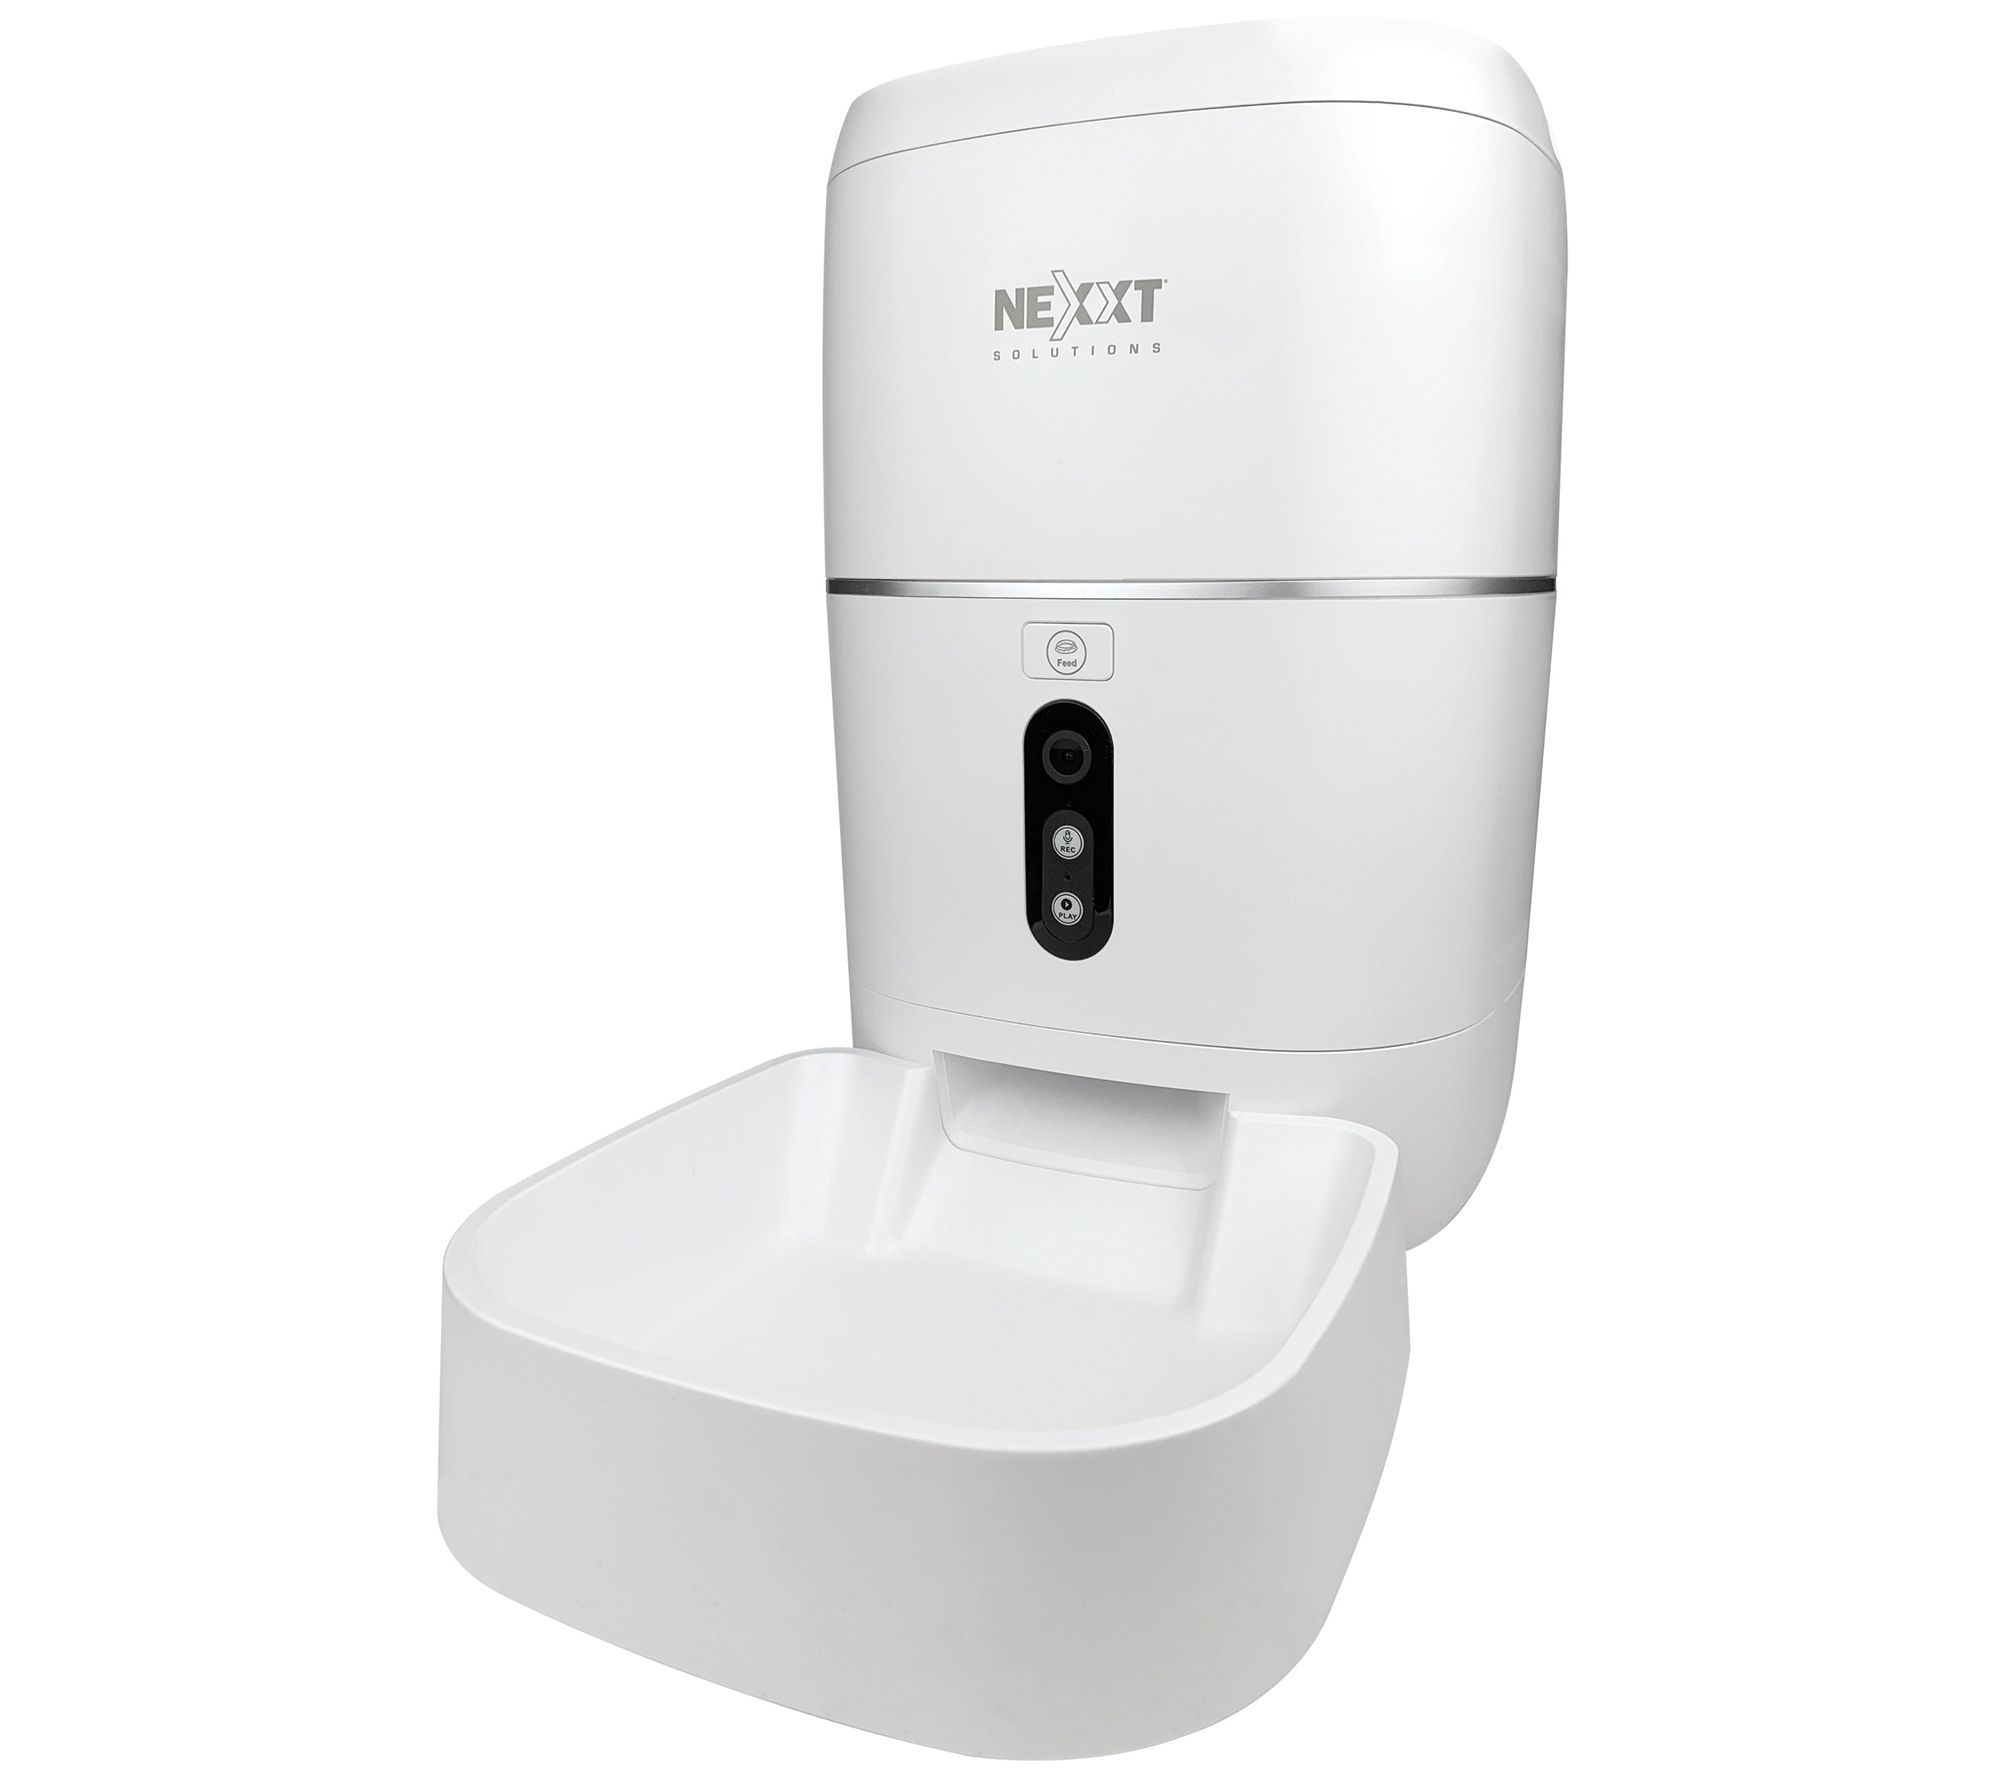 nexxt-solutions-home-smart-wi-fi-pet-feeder-w-built-in-camera-qvc